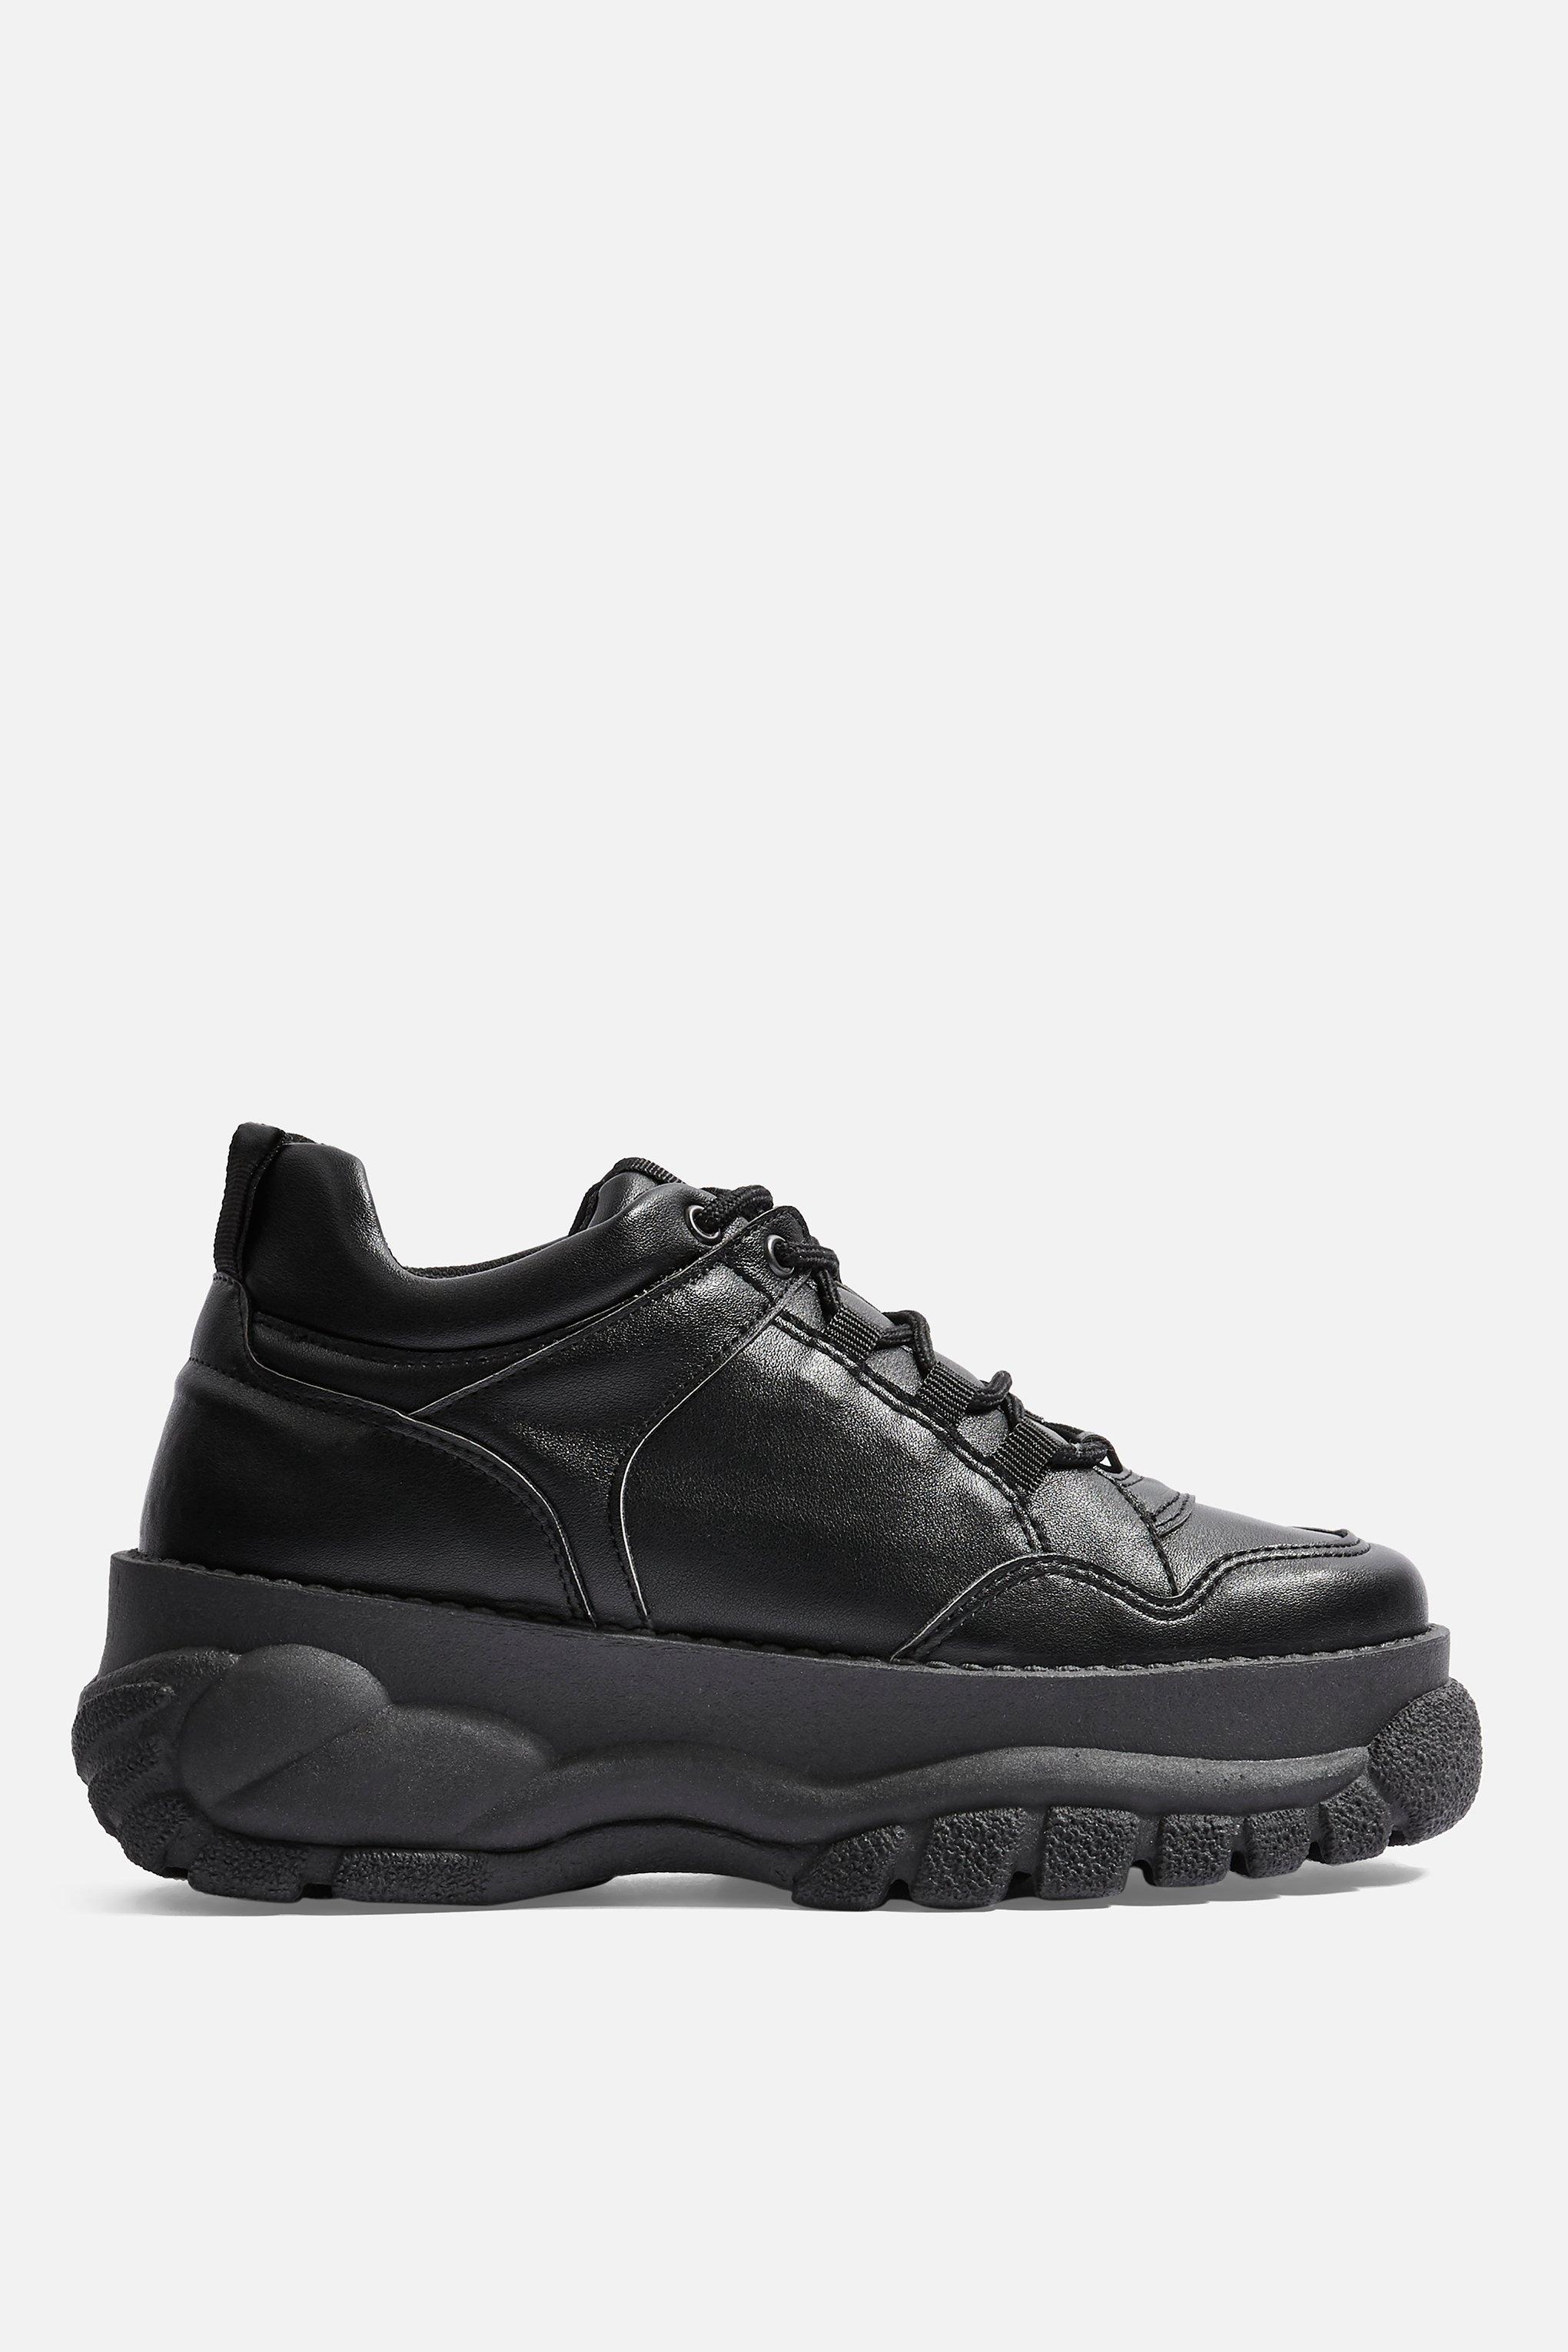 TOPSHOP Cairo Chunky Trainers in Black 